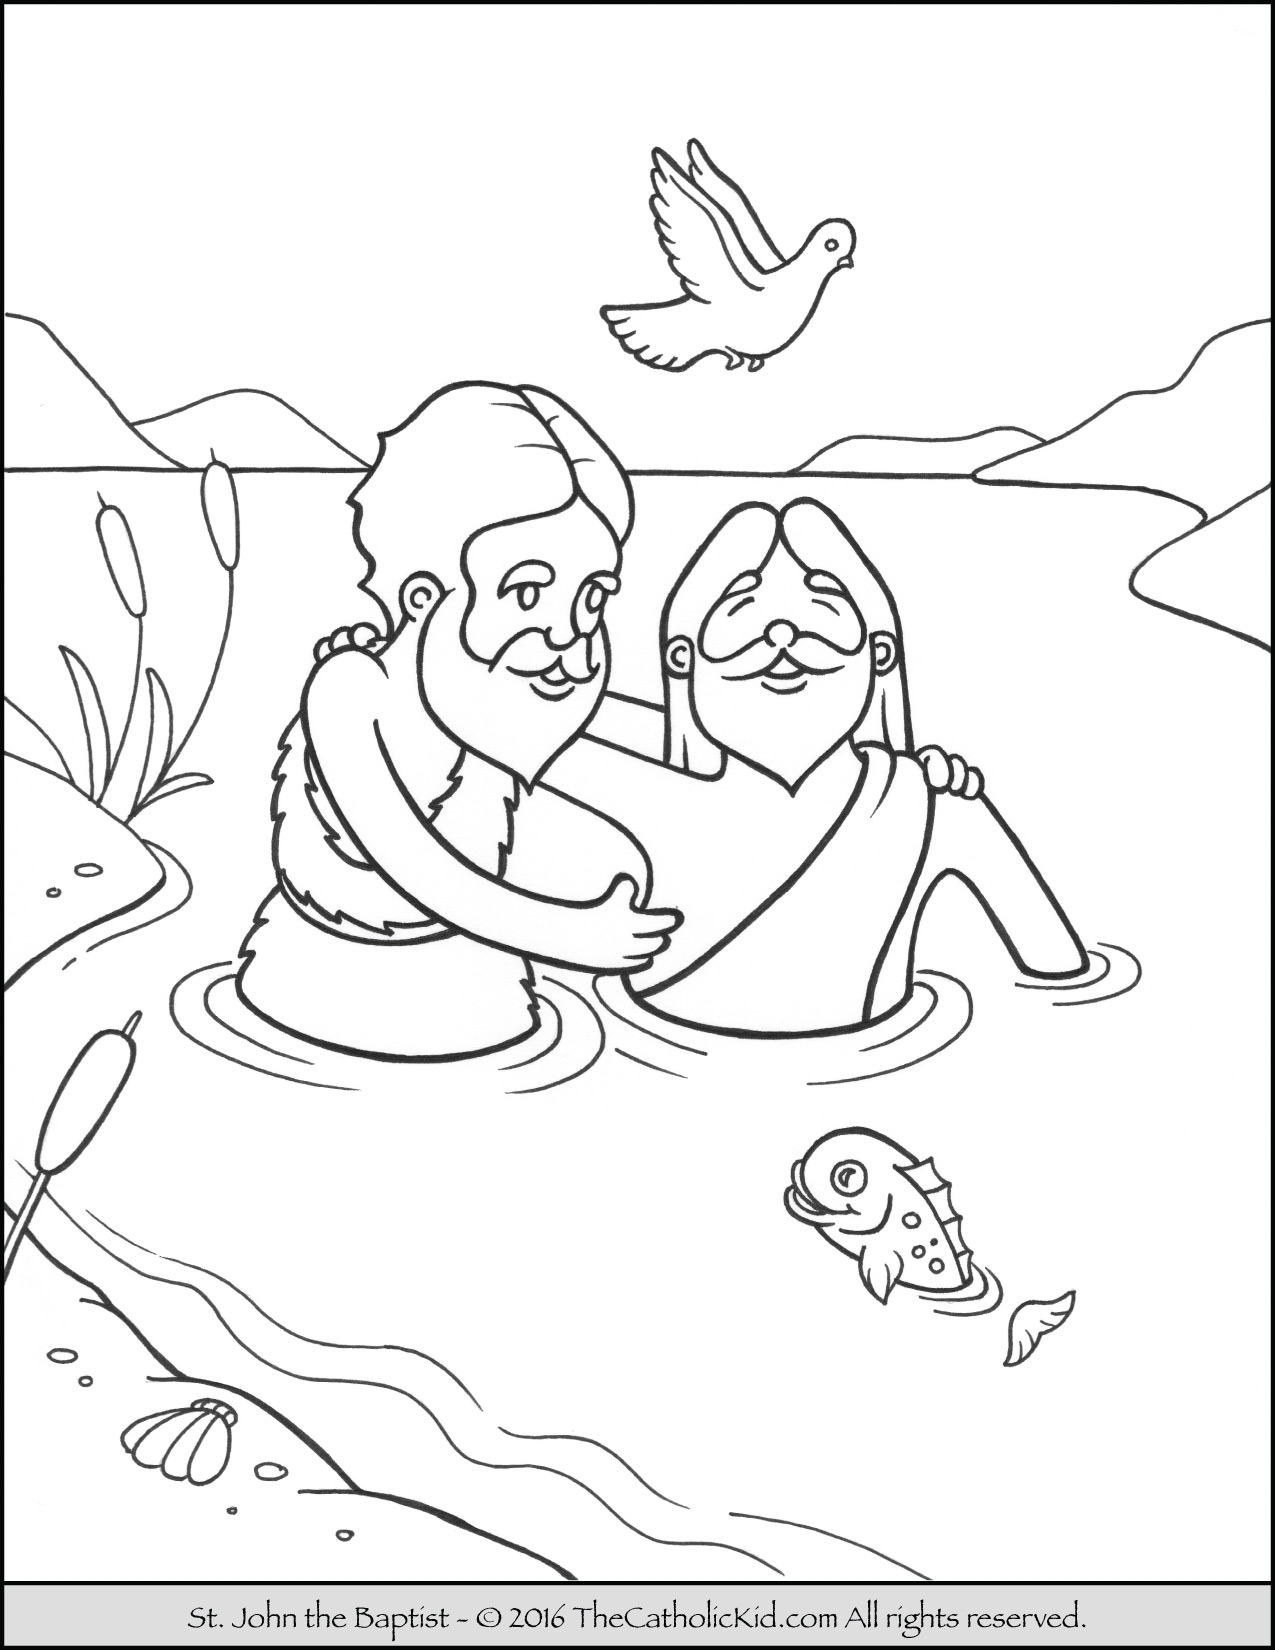 Kids Holding Hands Coloring Page at GetColorings.com ...